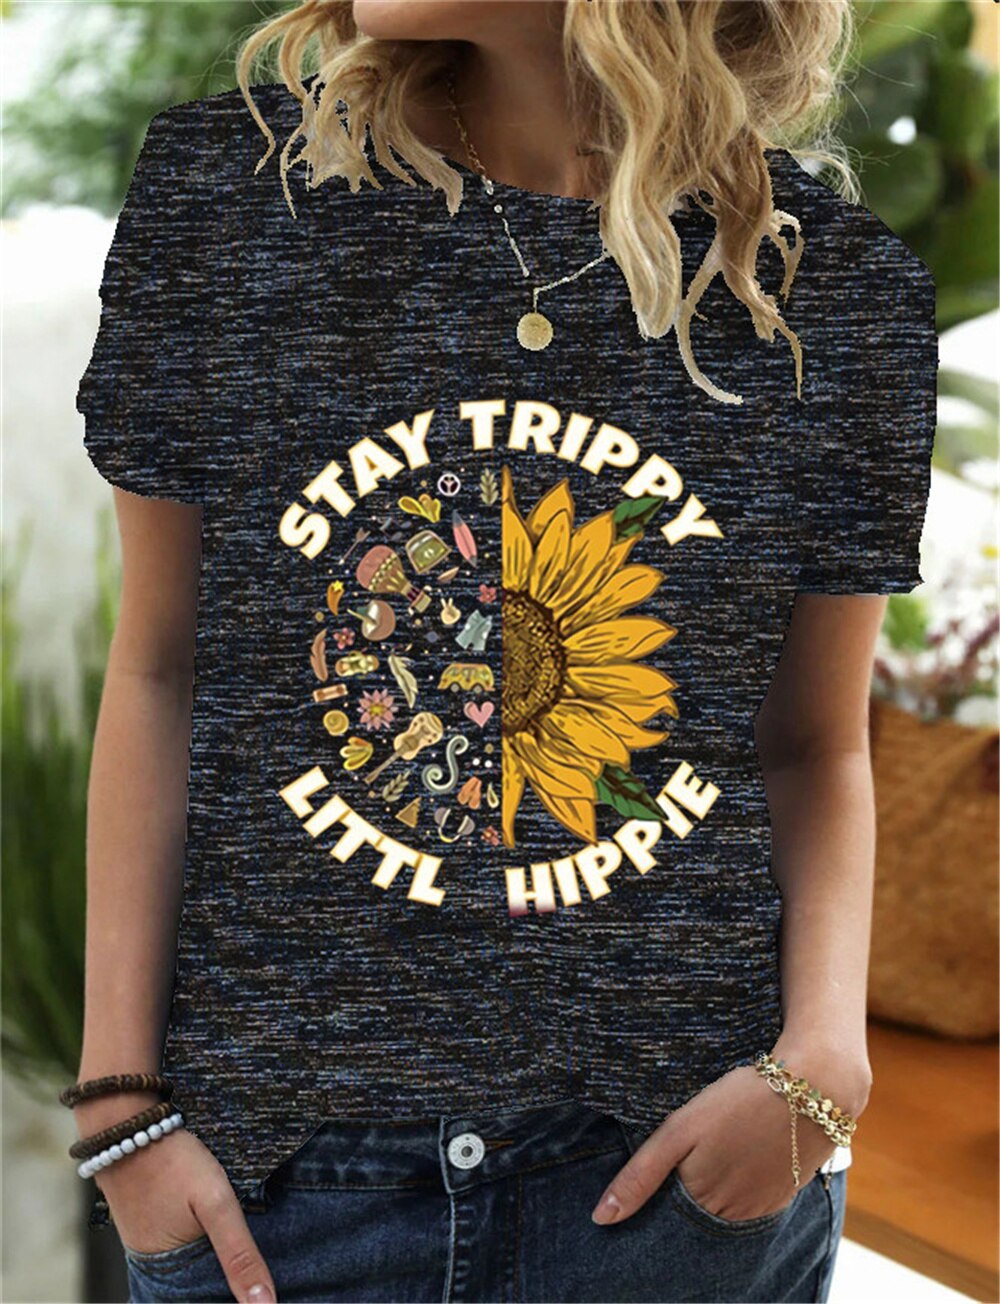 Stay Trippy Little Hippie Women Tshirt Organic T Shirt For Lady Girl Woman T-Shirts Graphic Top Tee Customize